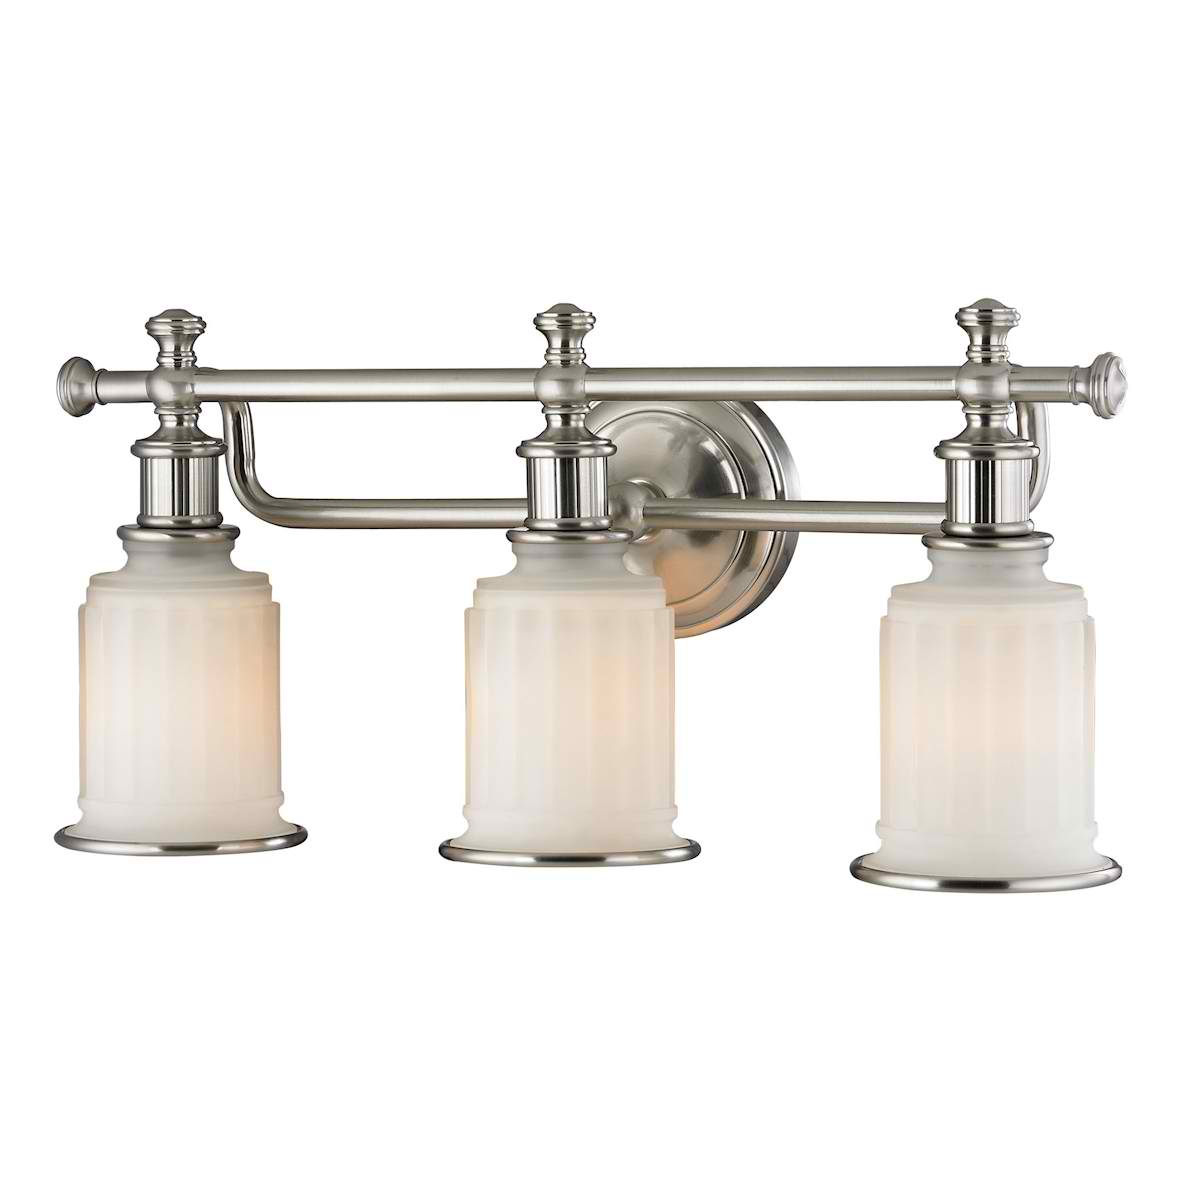 Acadia Collection 3 Light Bath in Brushed Nickel